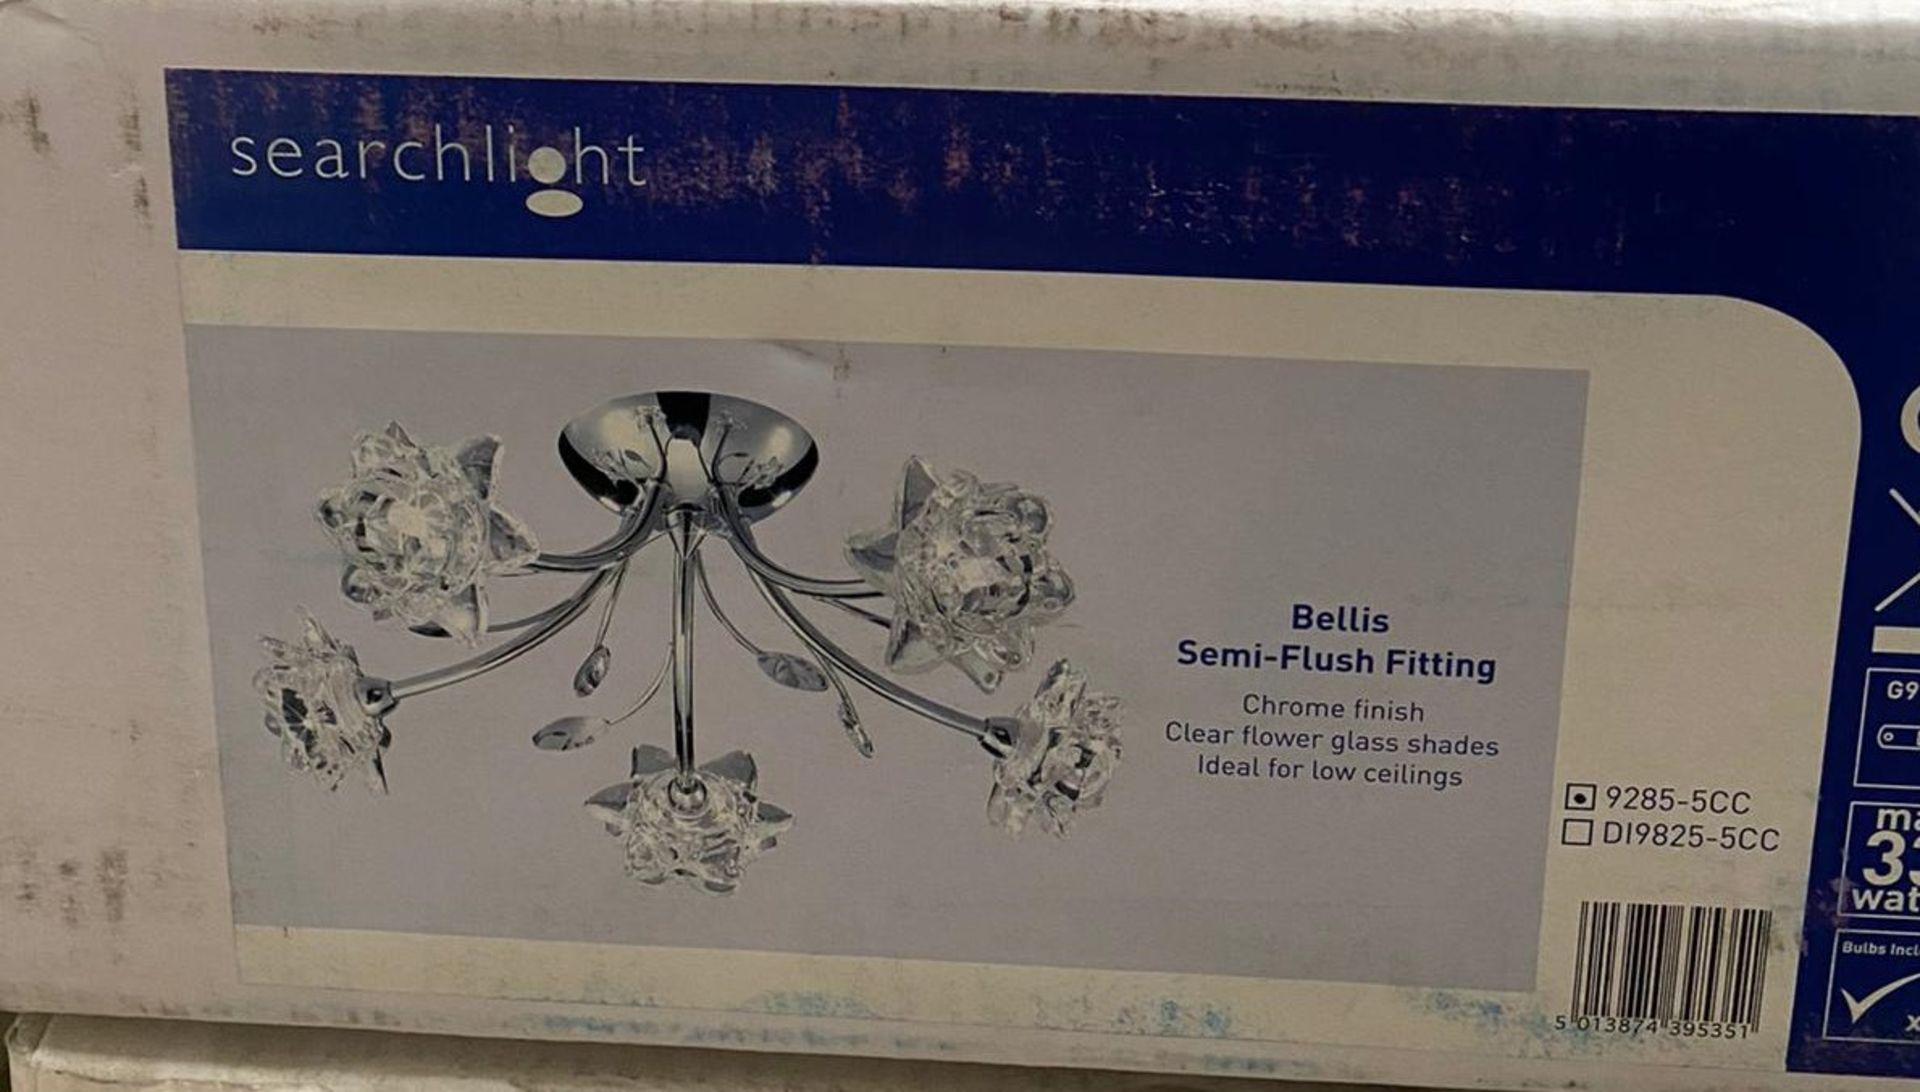 1 x Searchlight Bellis II Semi-flush fitting in chrome - Ref: 9285-5CC - New and Boxed - RRP: £100